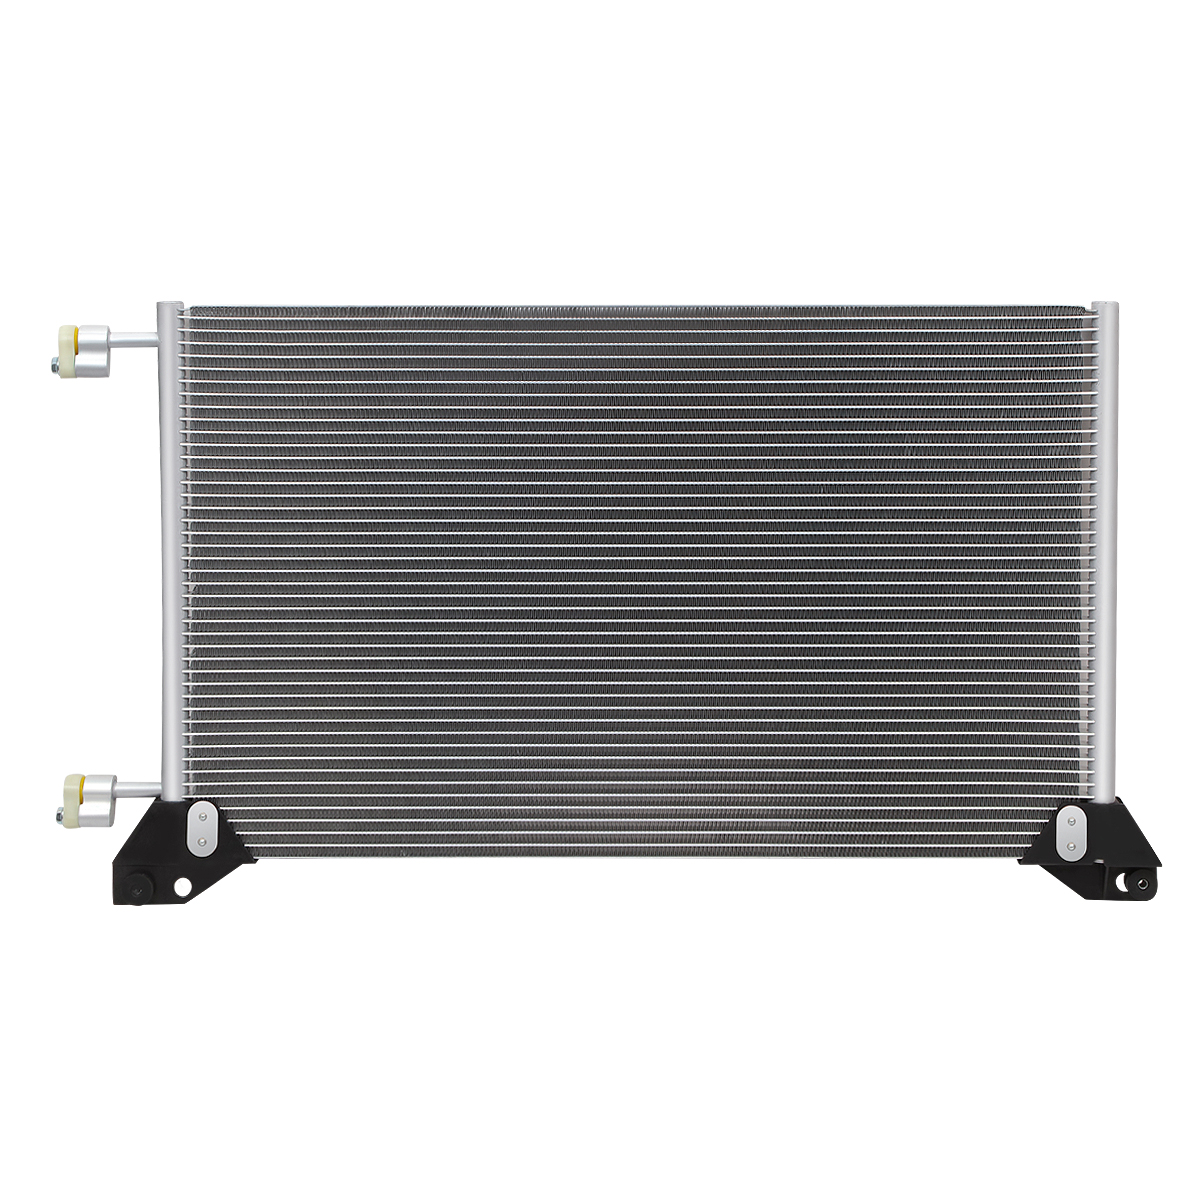 DNA Motoring OEM-CDS-4953 For 2000 to 2013 Chevy Suburban 1500 2500 GMC Sierra Yukon XL Cadillac Escalade 4.3L - 8.1L 4953 Aluminum Air Conditioning A/C Condenser 01 02 03 04 05 06 07 08 09 10 11 12 - image 5 of 6